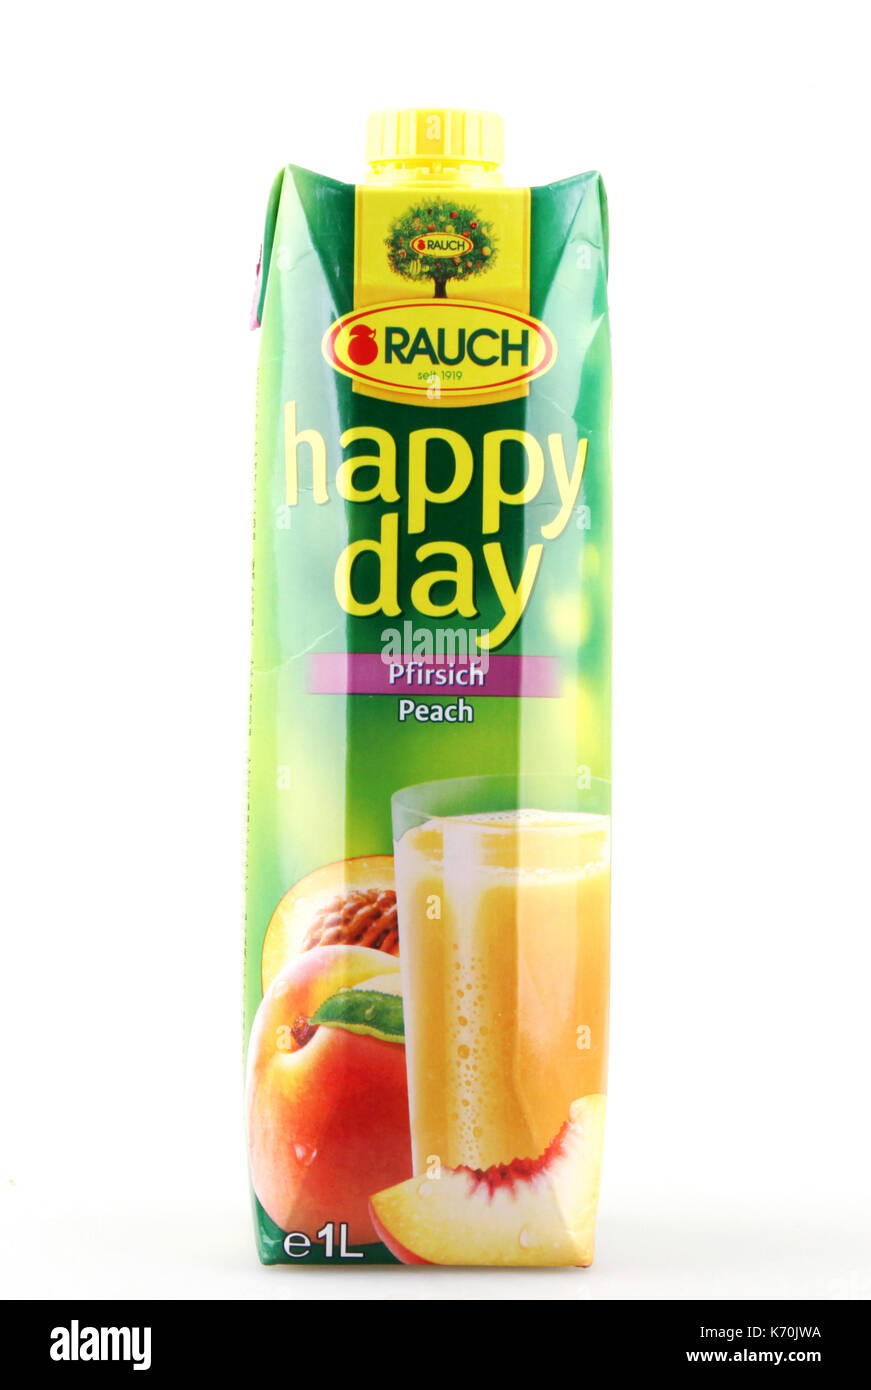 Pomorie, Bulgaria - September 13, 2017: Natural Fruit Juice Rauch. Rauch is an Austrian beverage company based in Rankweil. It was founded in 1919. Stock Photo